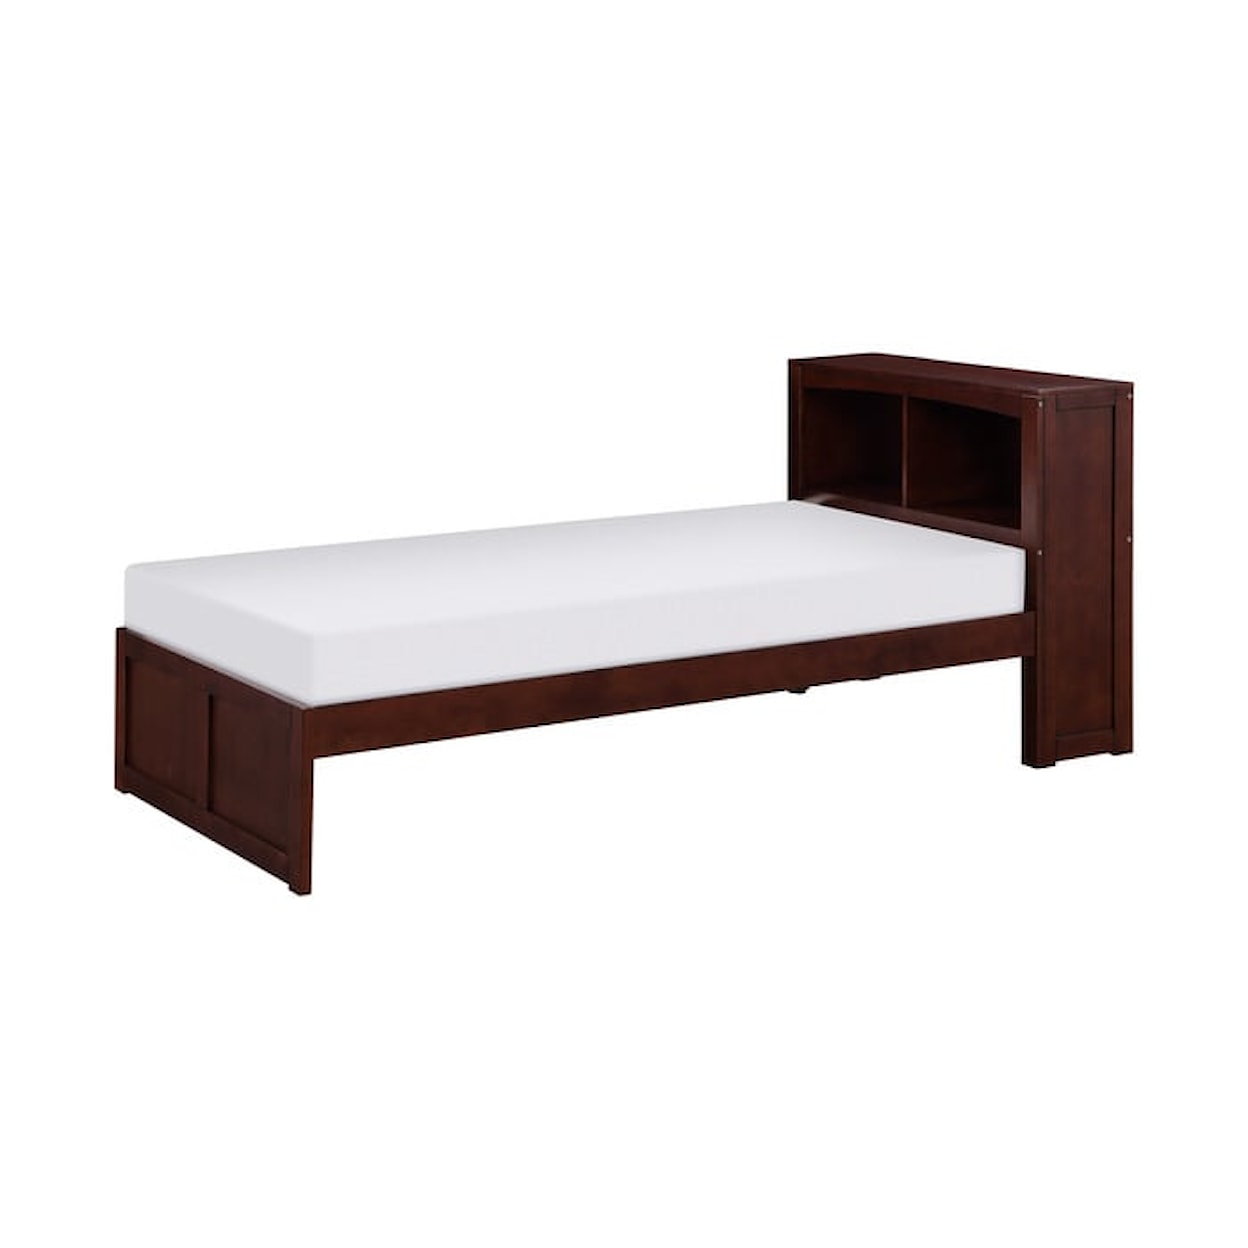 Homelegance Furniture Discovery Twin Bookcase Bed